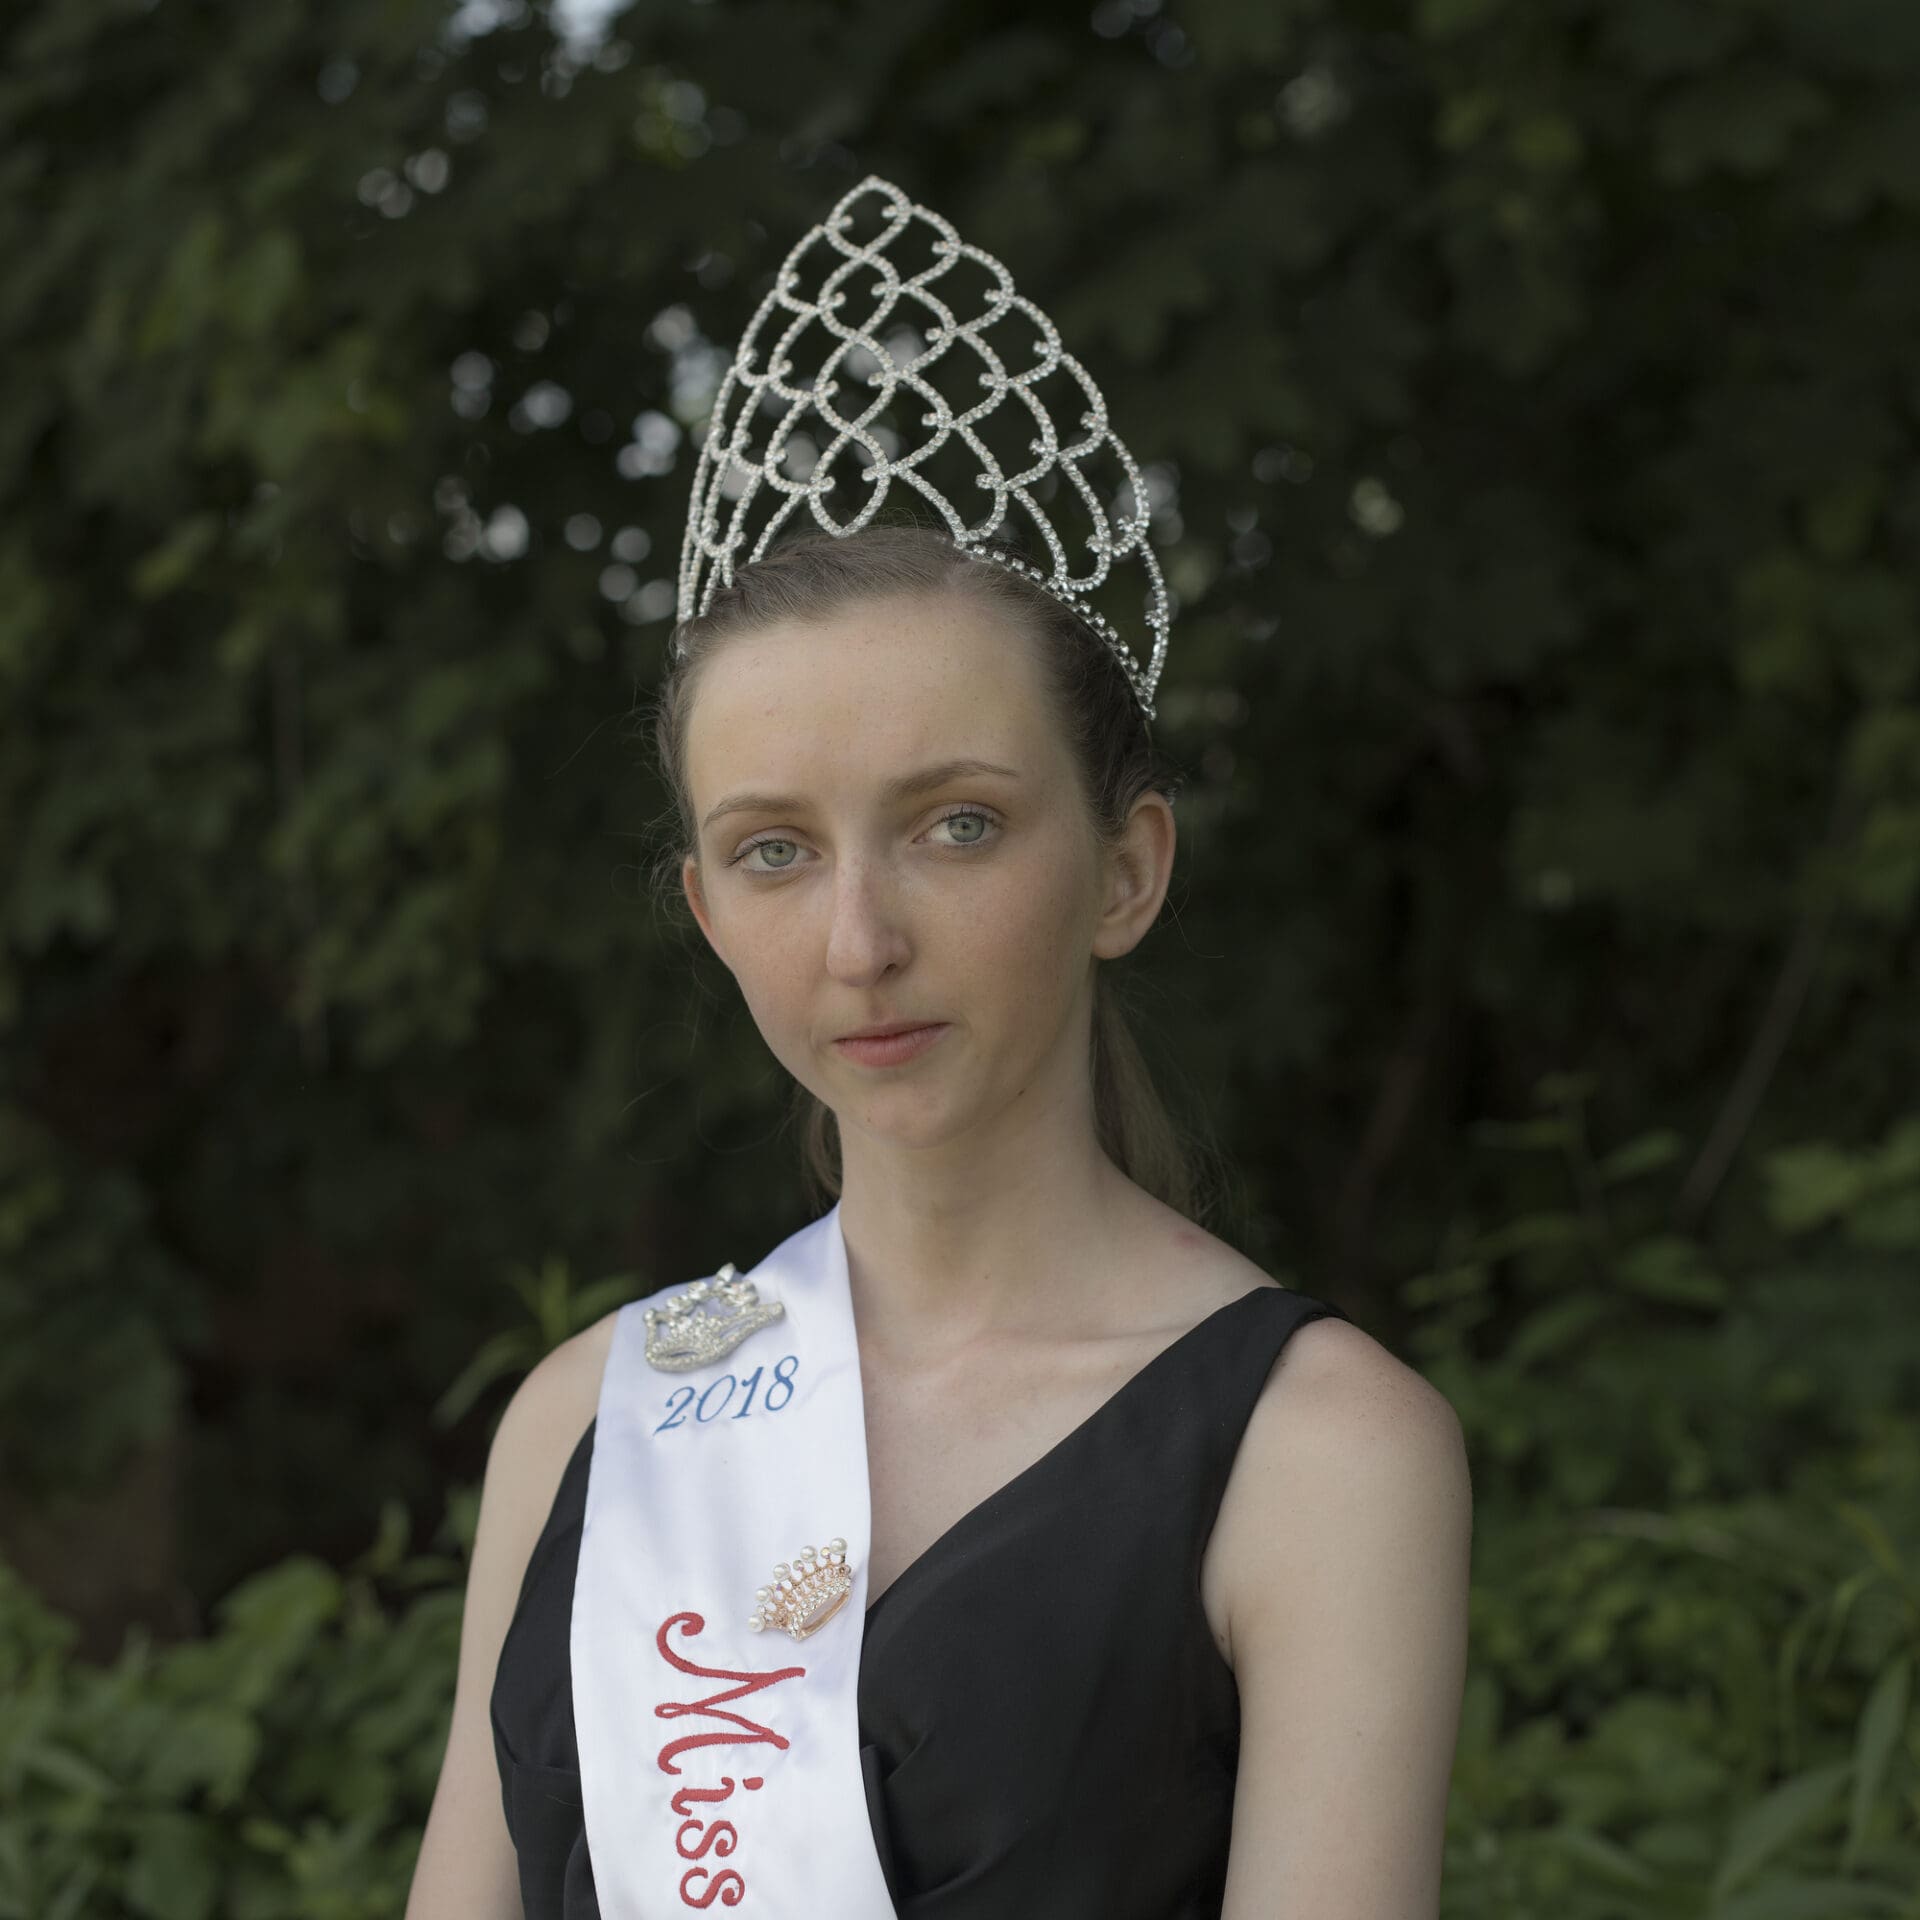 Photographer Rich-Joseph Facun | A young girl with brown hair and wearing a black dress wears a high tiara and a sash